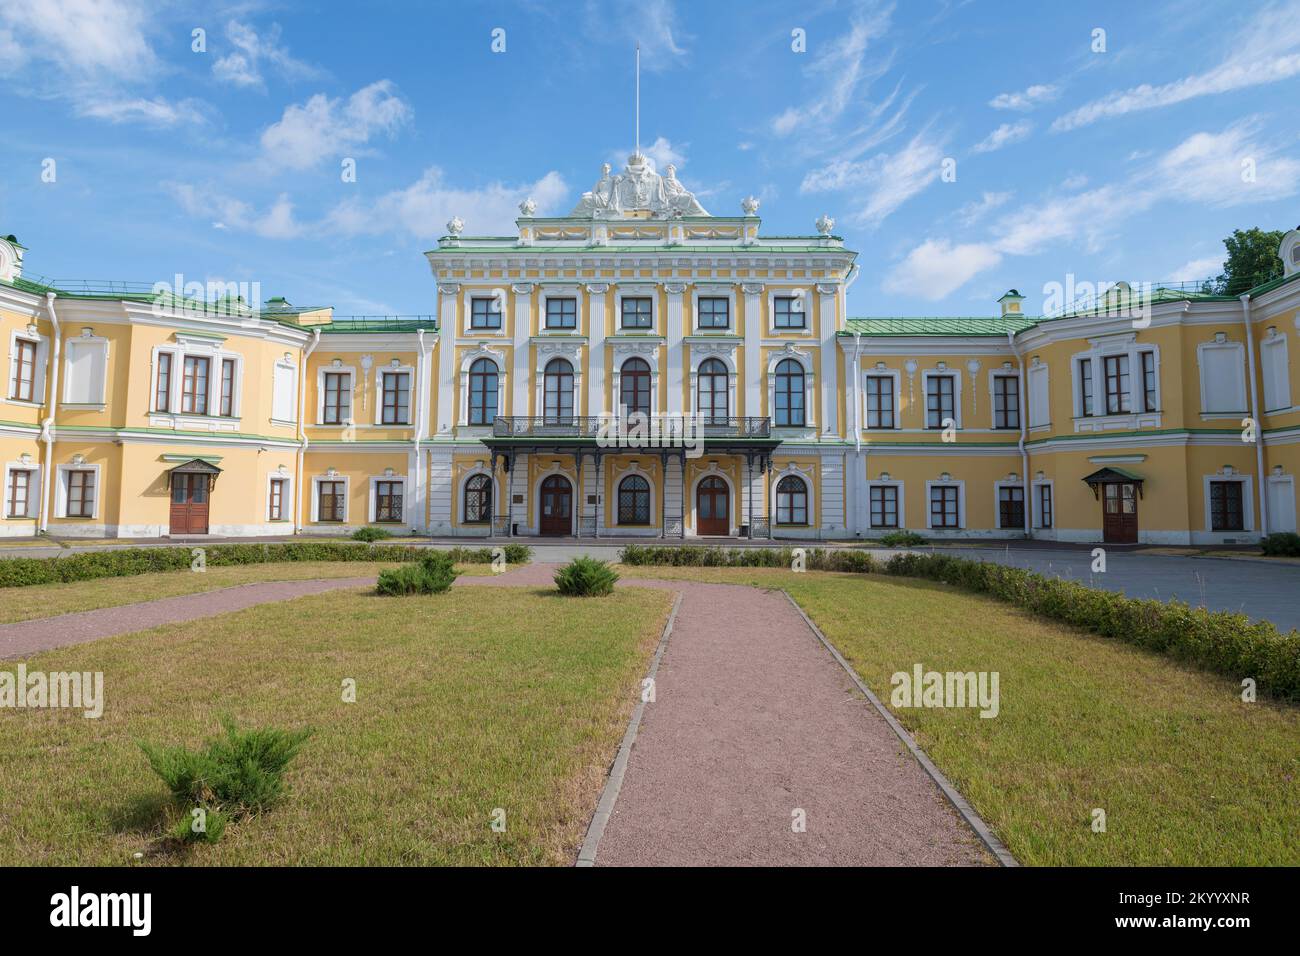 TVER, RUSSIA - JULY 15, 2022: At the ancient Imperial Travel Palace on a sunny July day Stock Photo